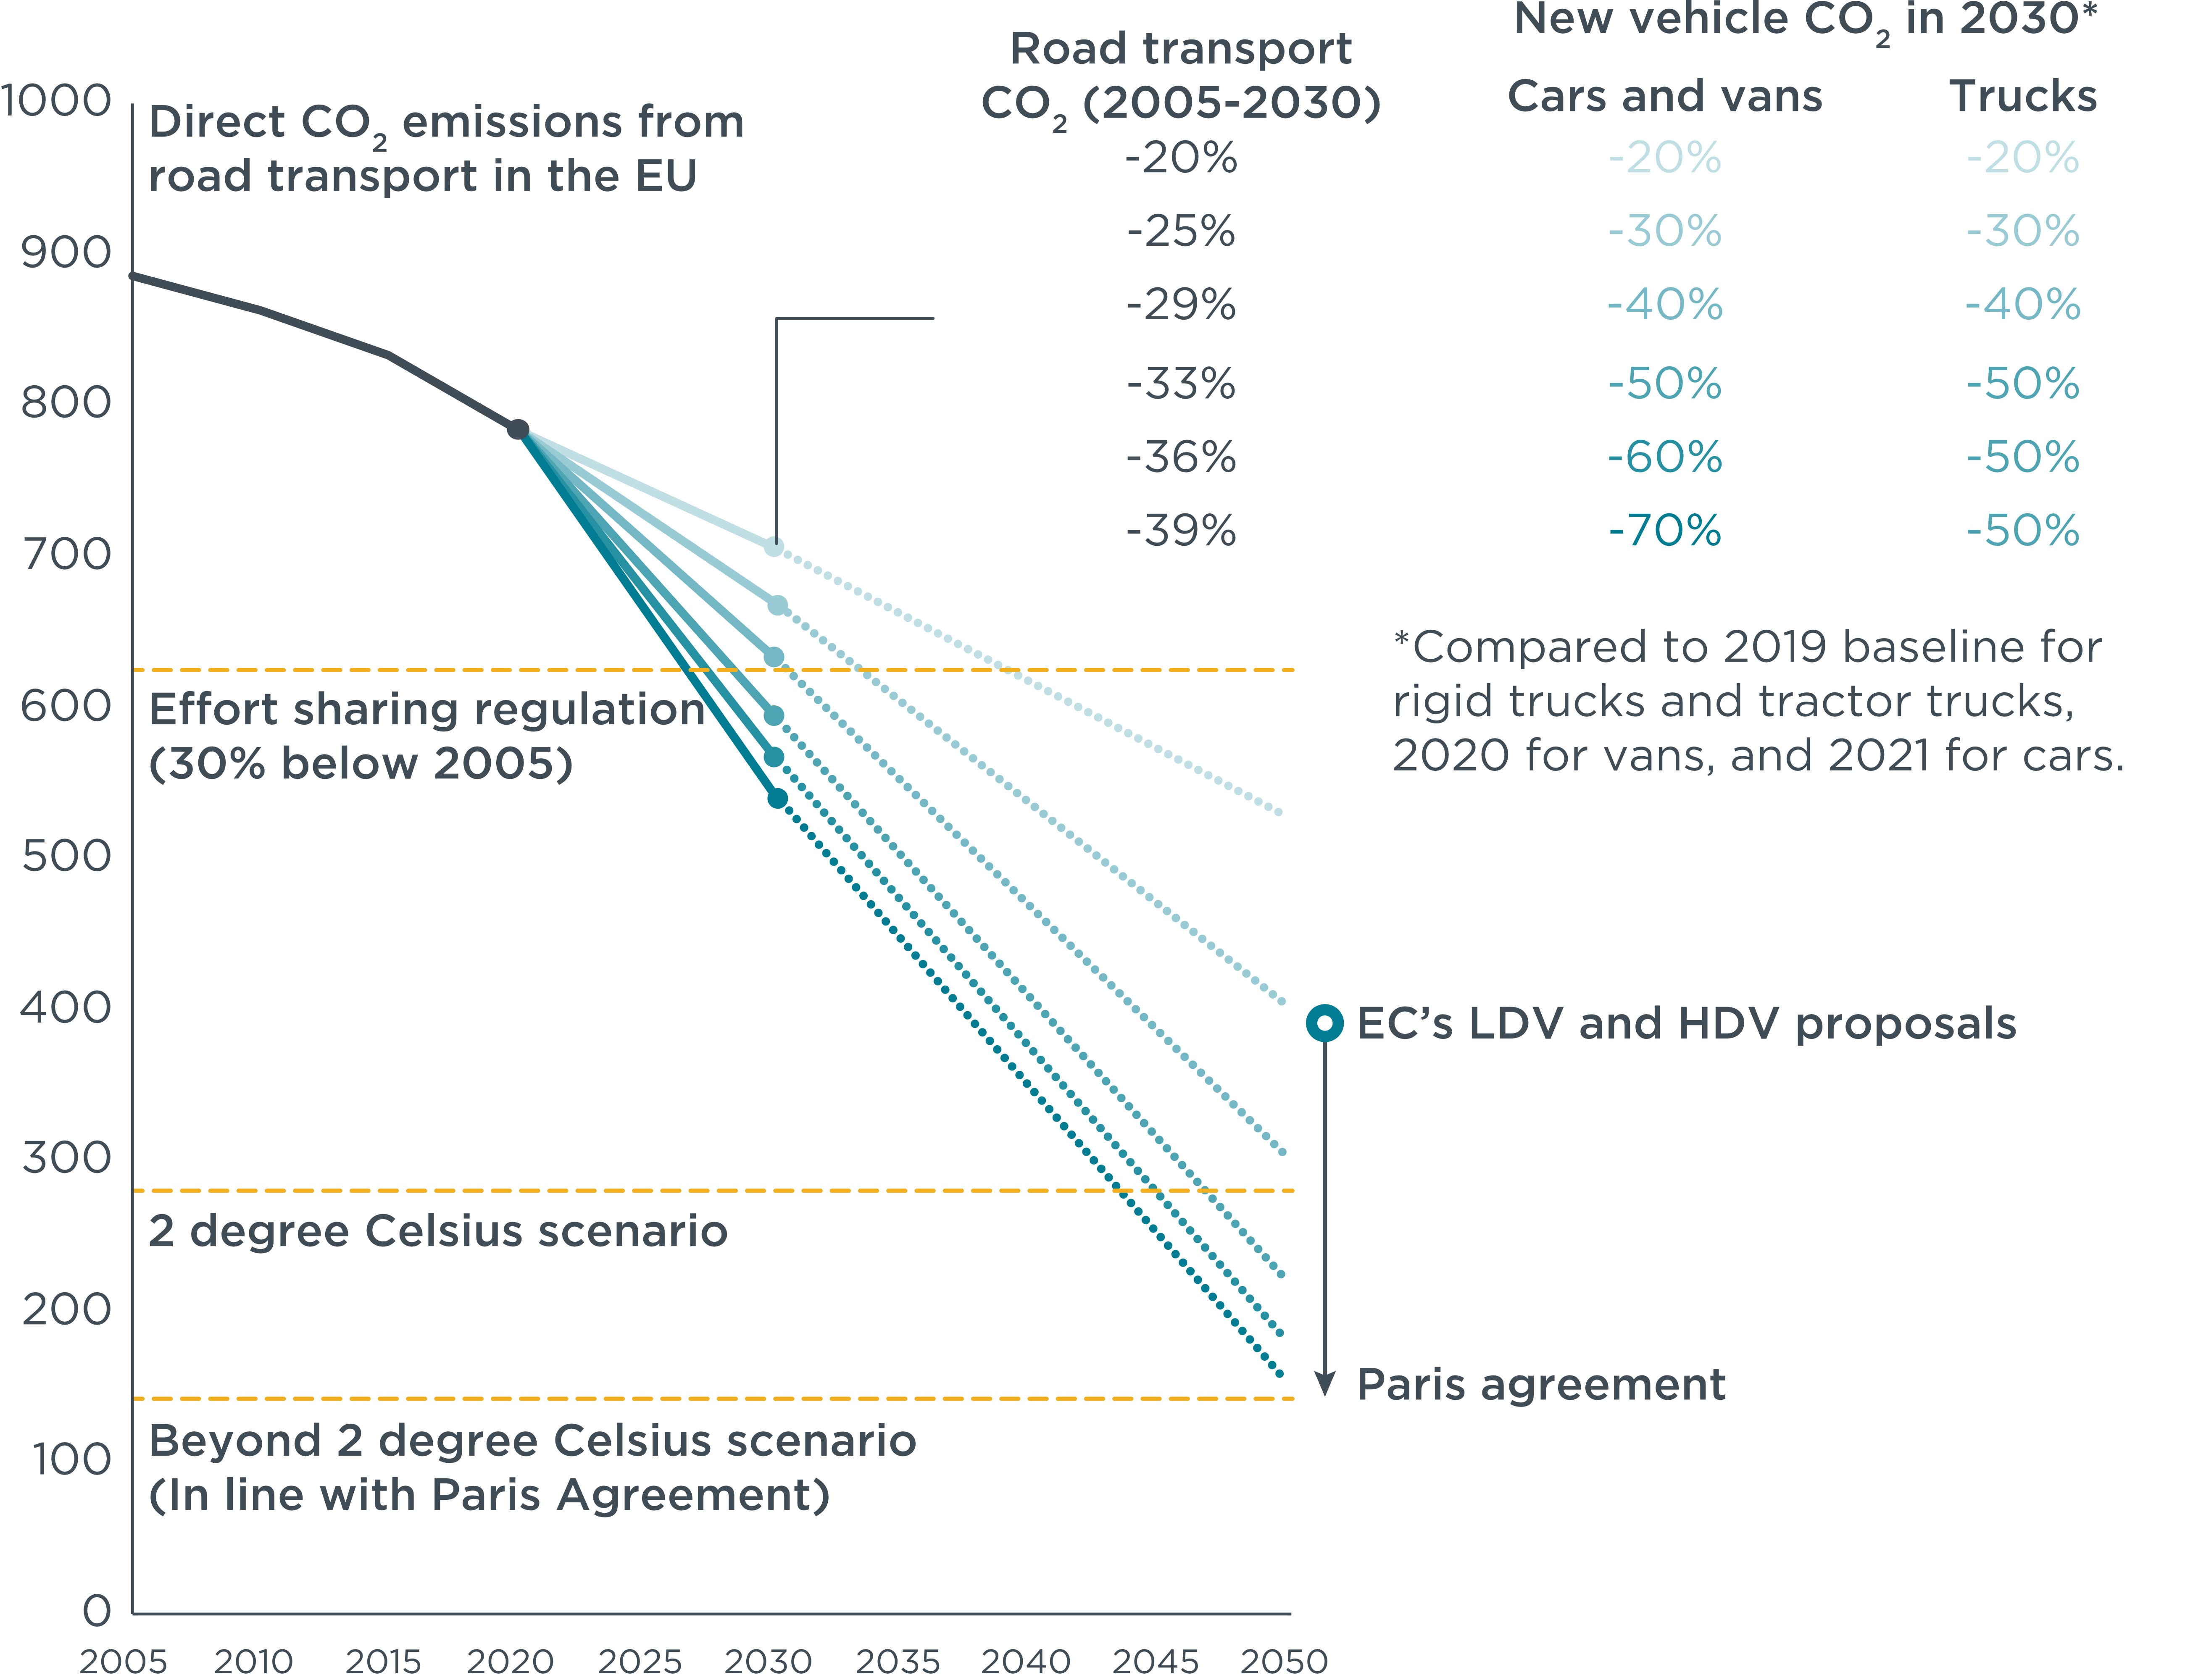 CO2 emissions from the transport sector under different scenarios for the period 2020 to 2050